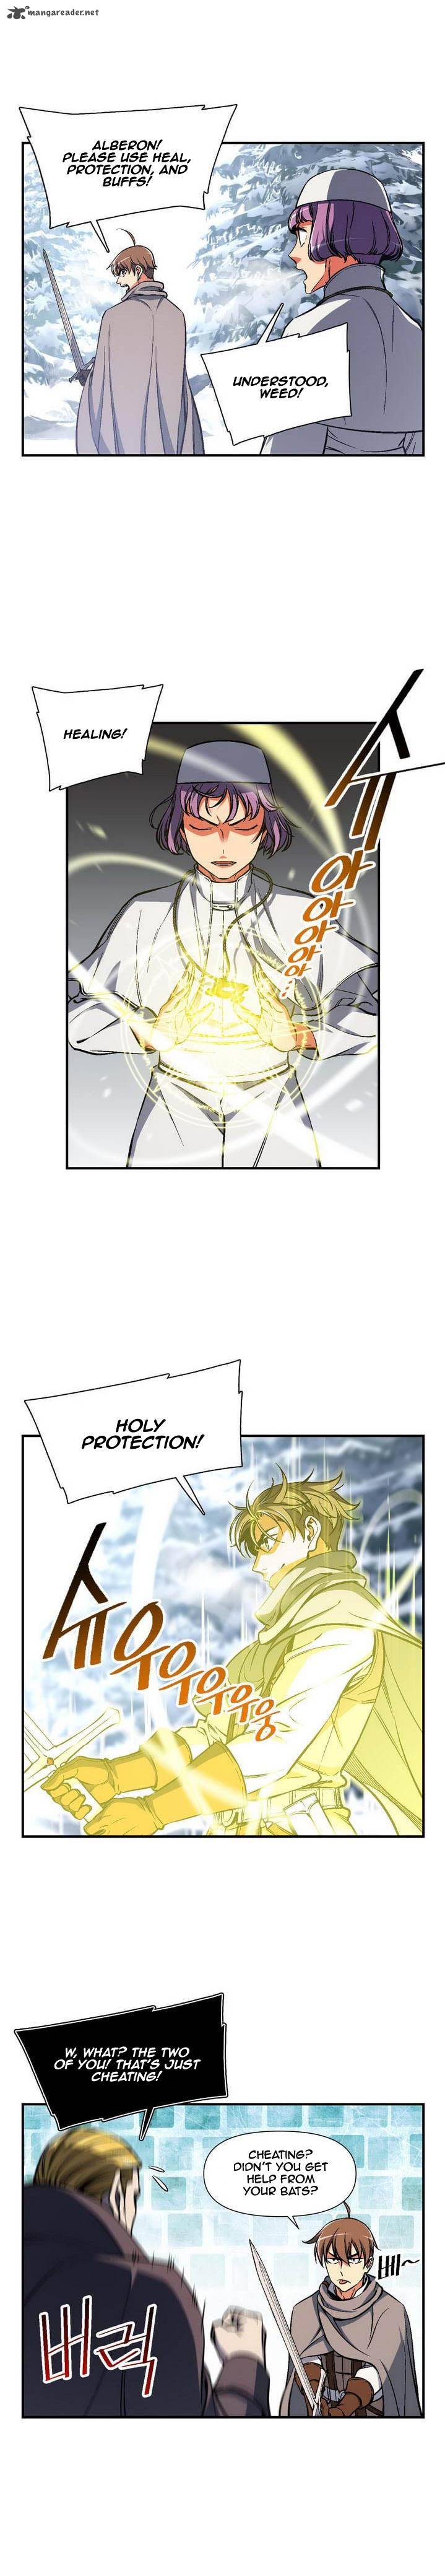 The Legendary Moonlight Sculptor Chapter 80 Page 3